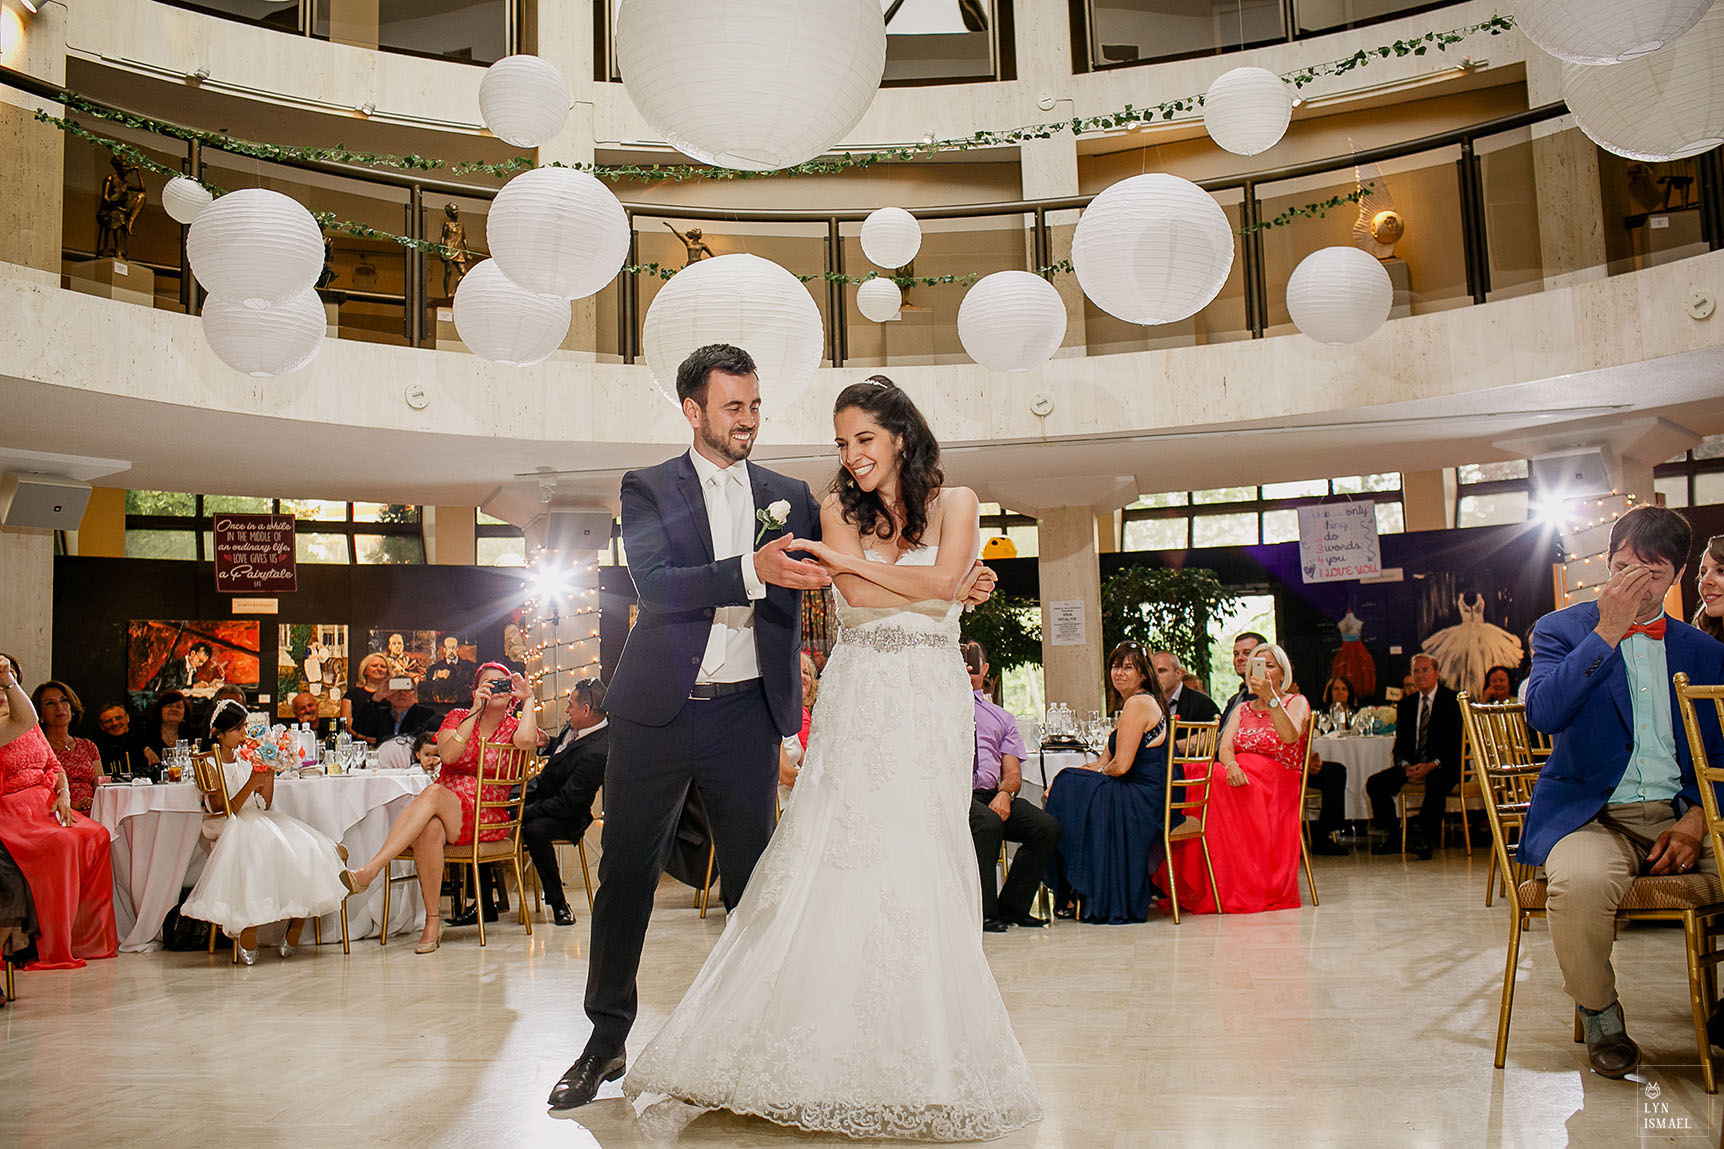 Bride and groom's first dance at their Columbus Event Centre wedding reception